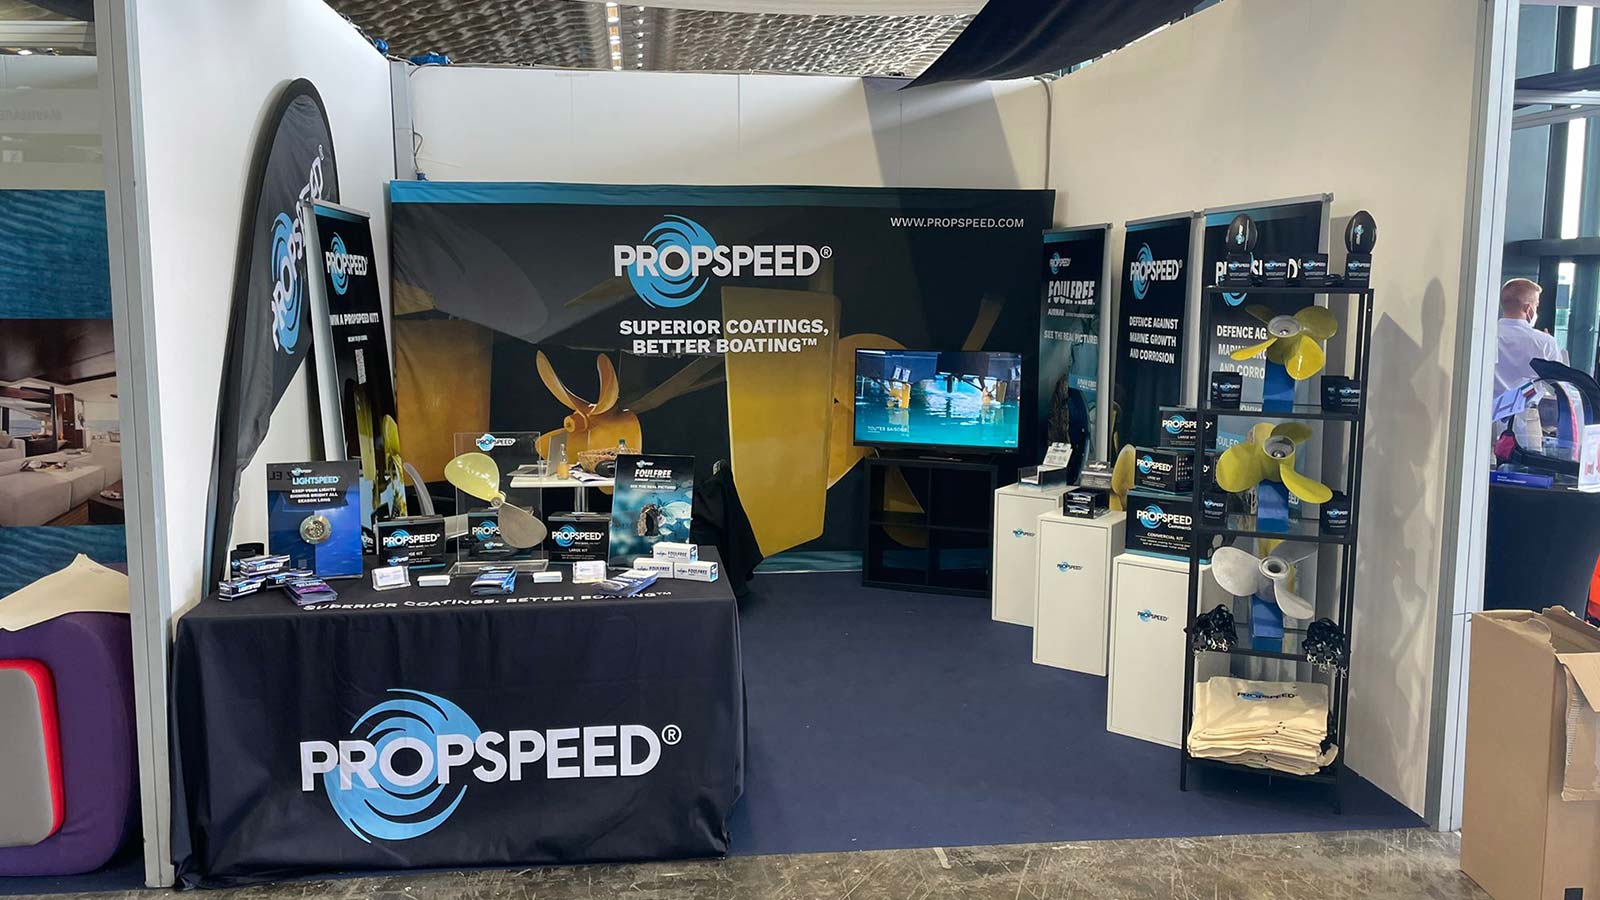 Propspeed stand at Genoa Boat Show 2021